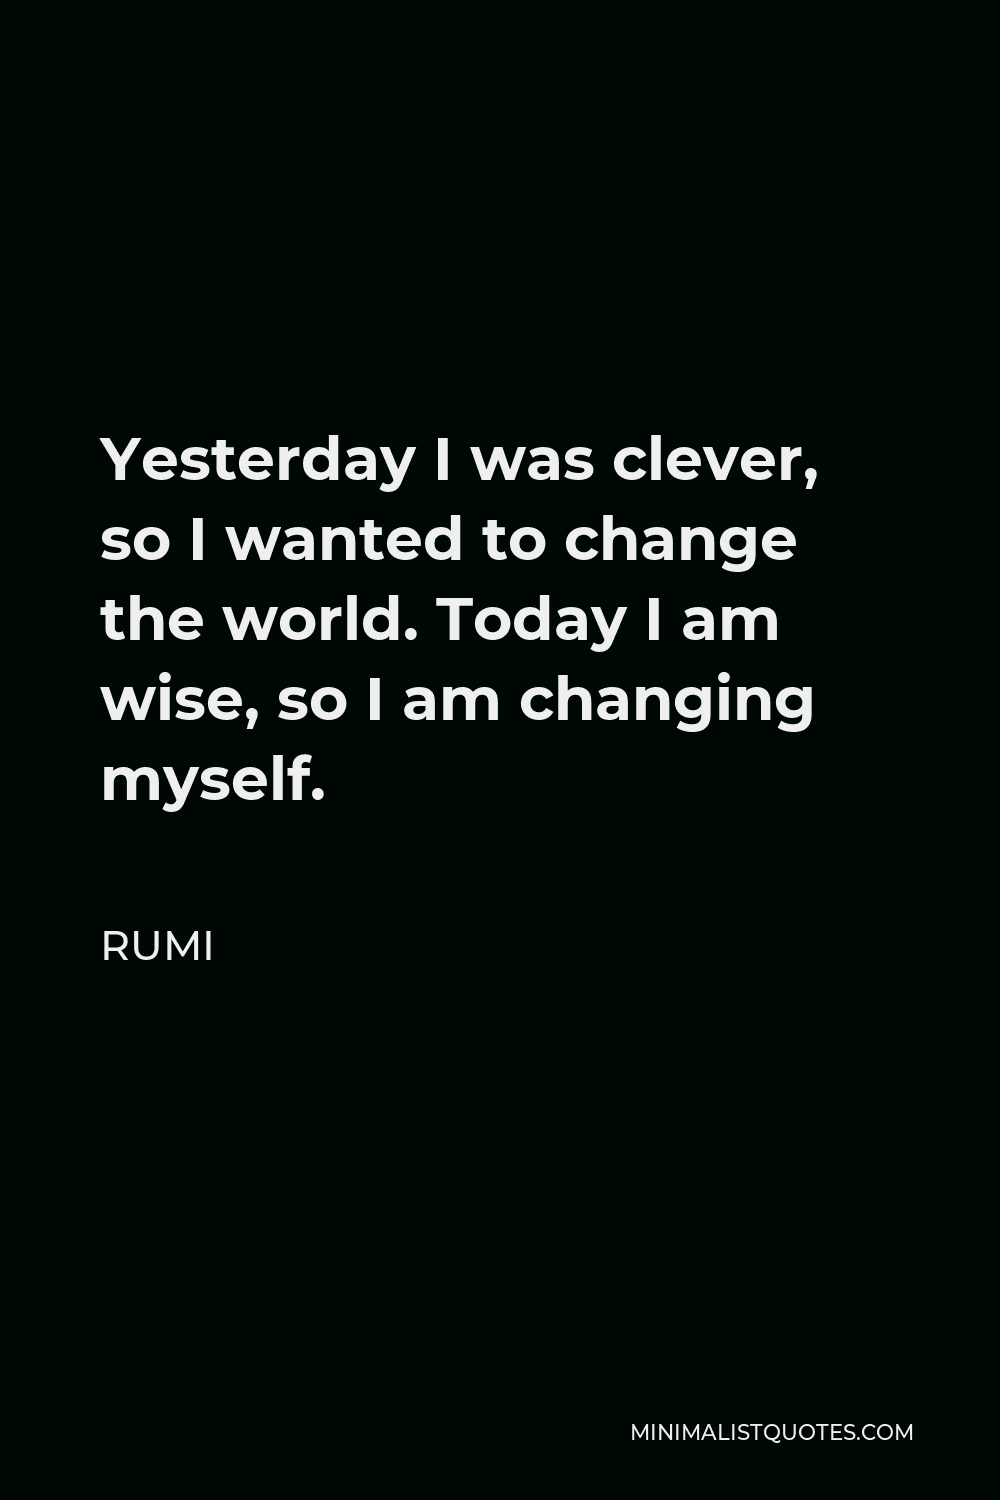 Rumi Quote - Yesterday I was clever, so I wanted to change the world. Today I am wise, so I am changing myself.